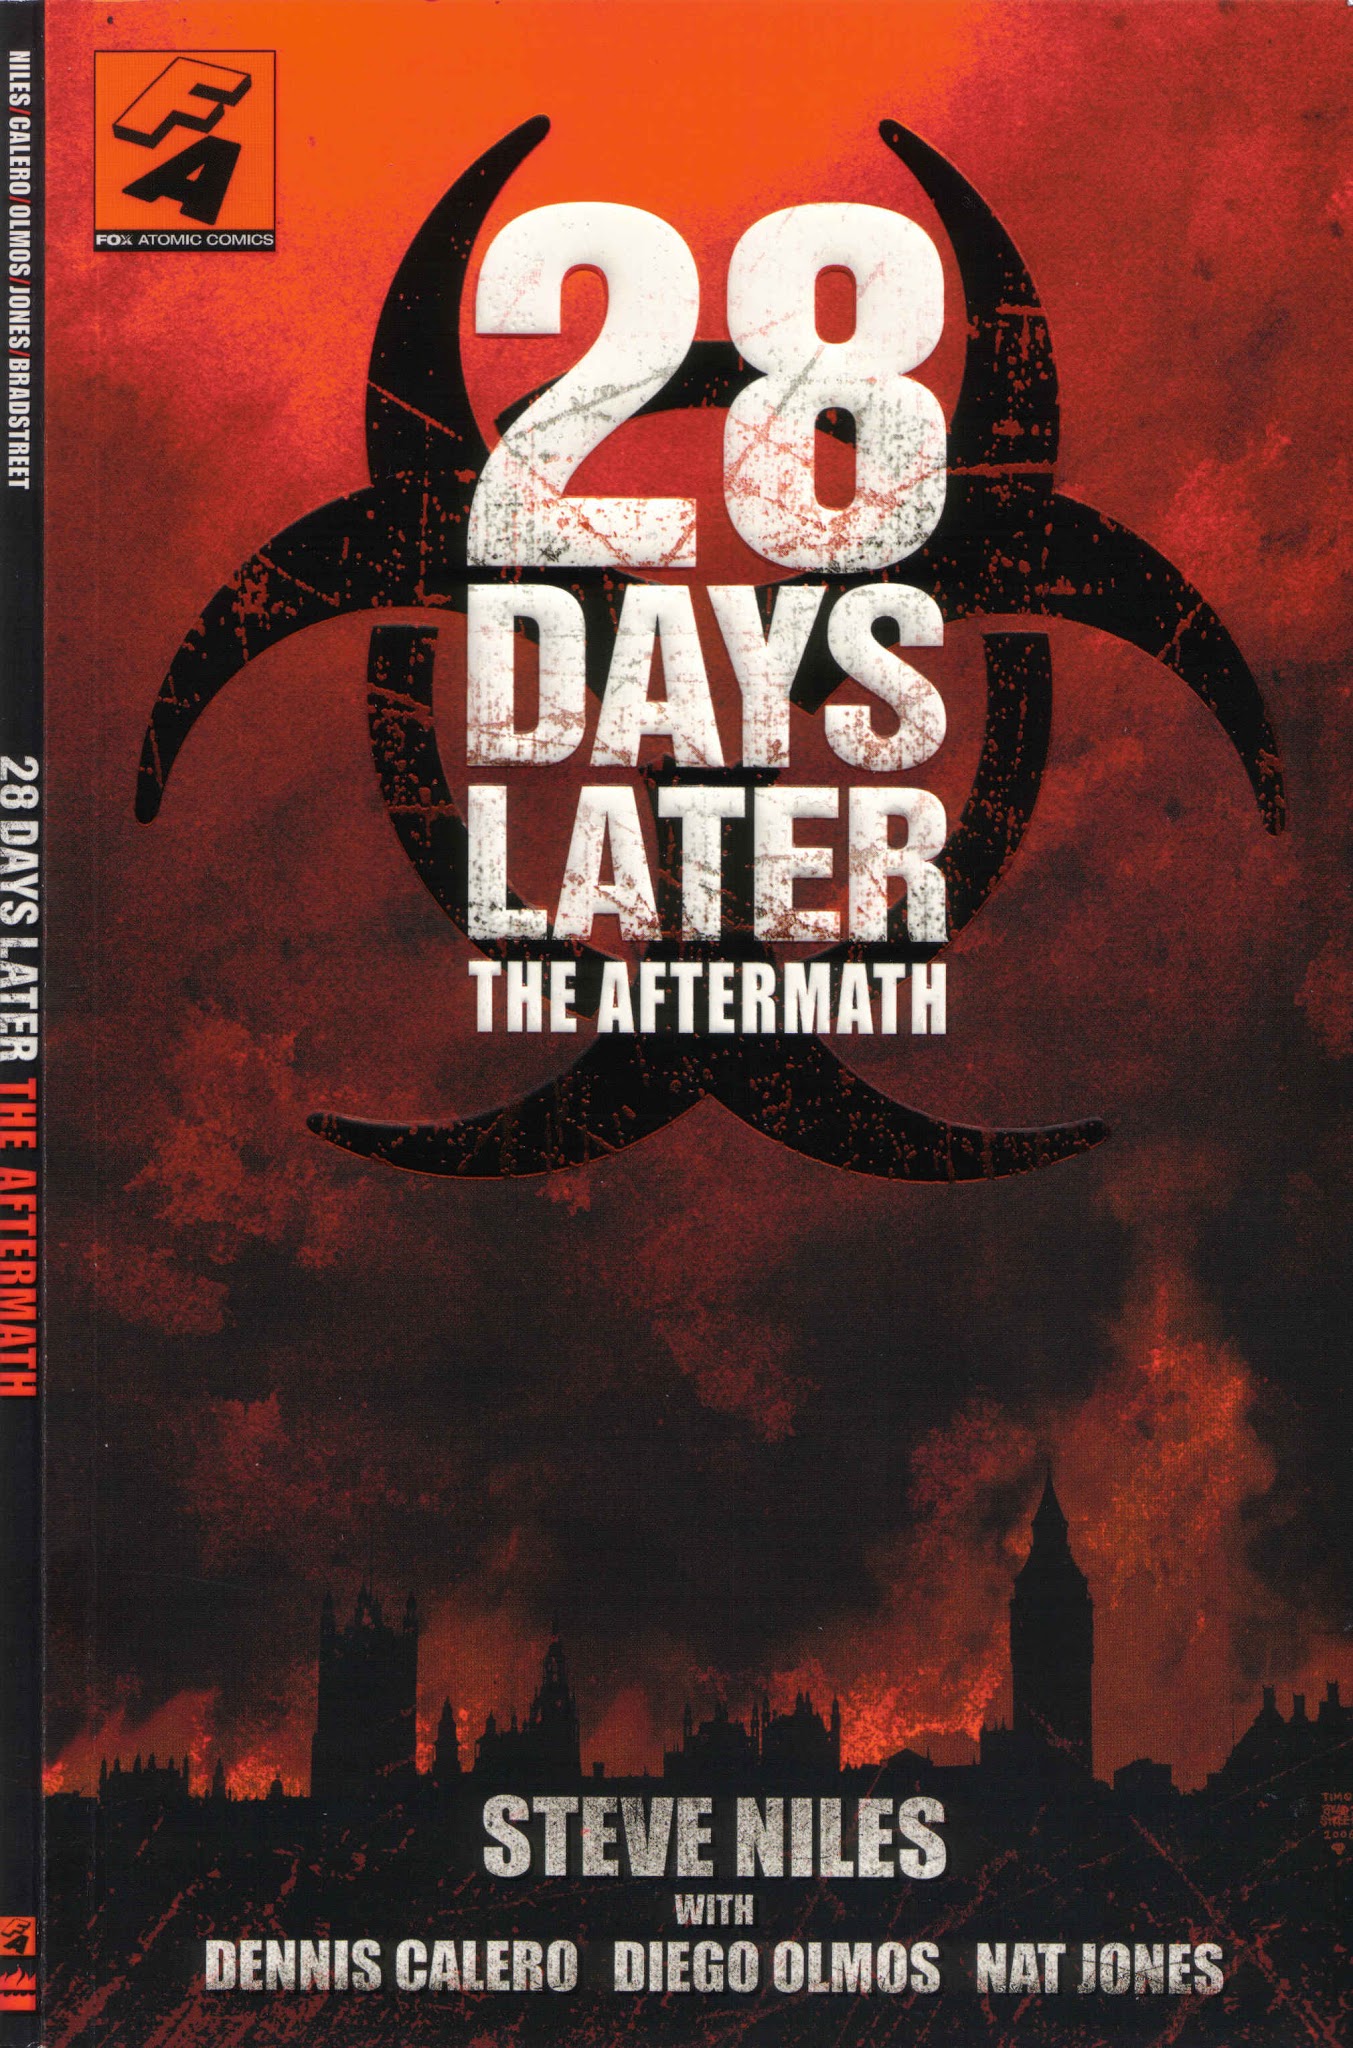 Read online 28 Days Later: The Aftermath comic -  Issue # TPB - 1